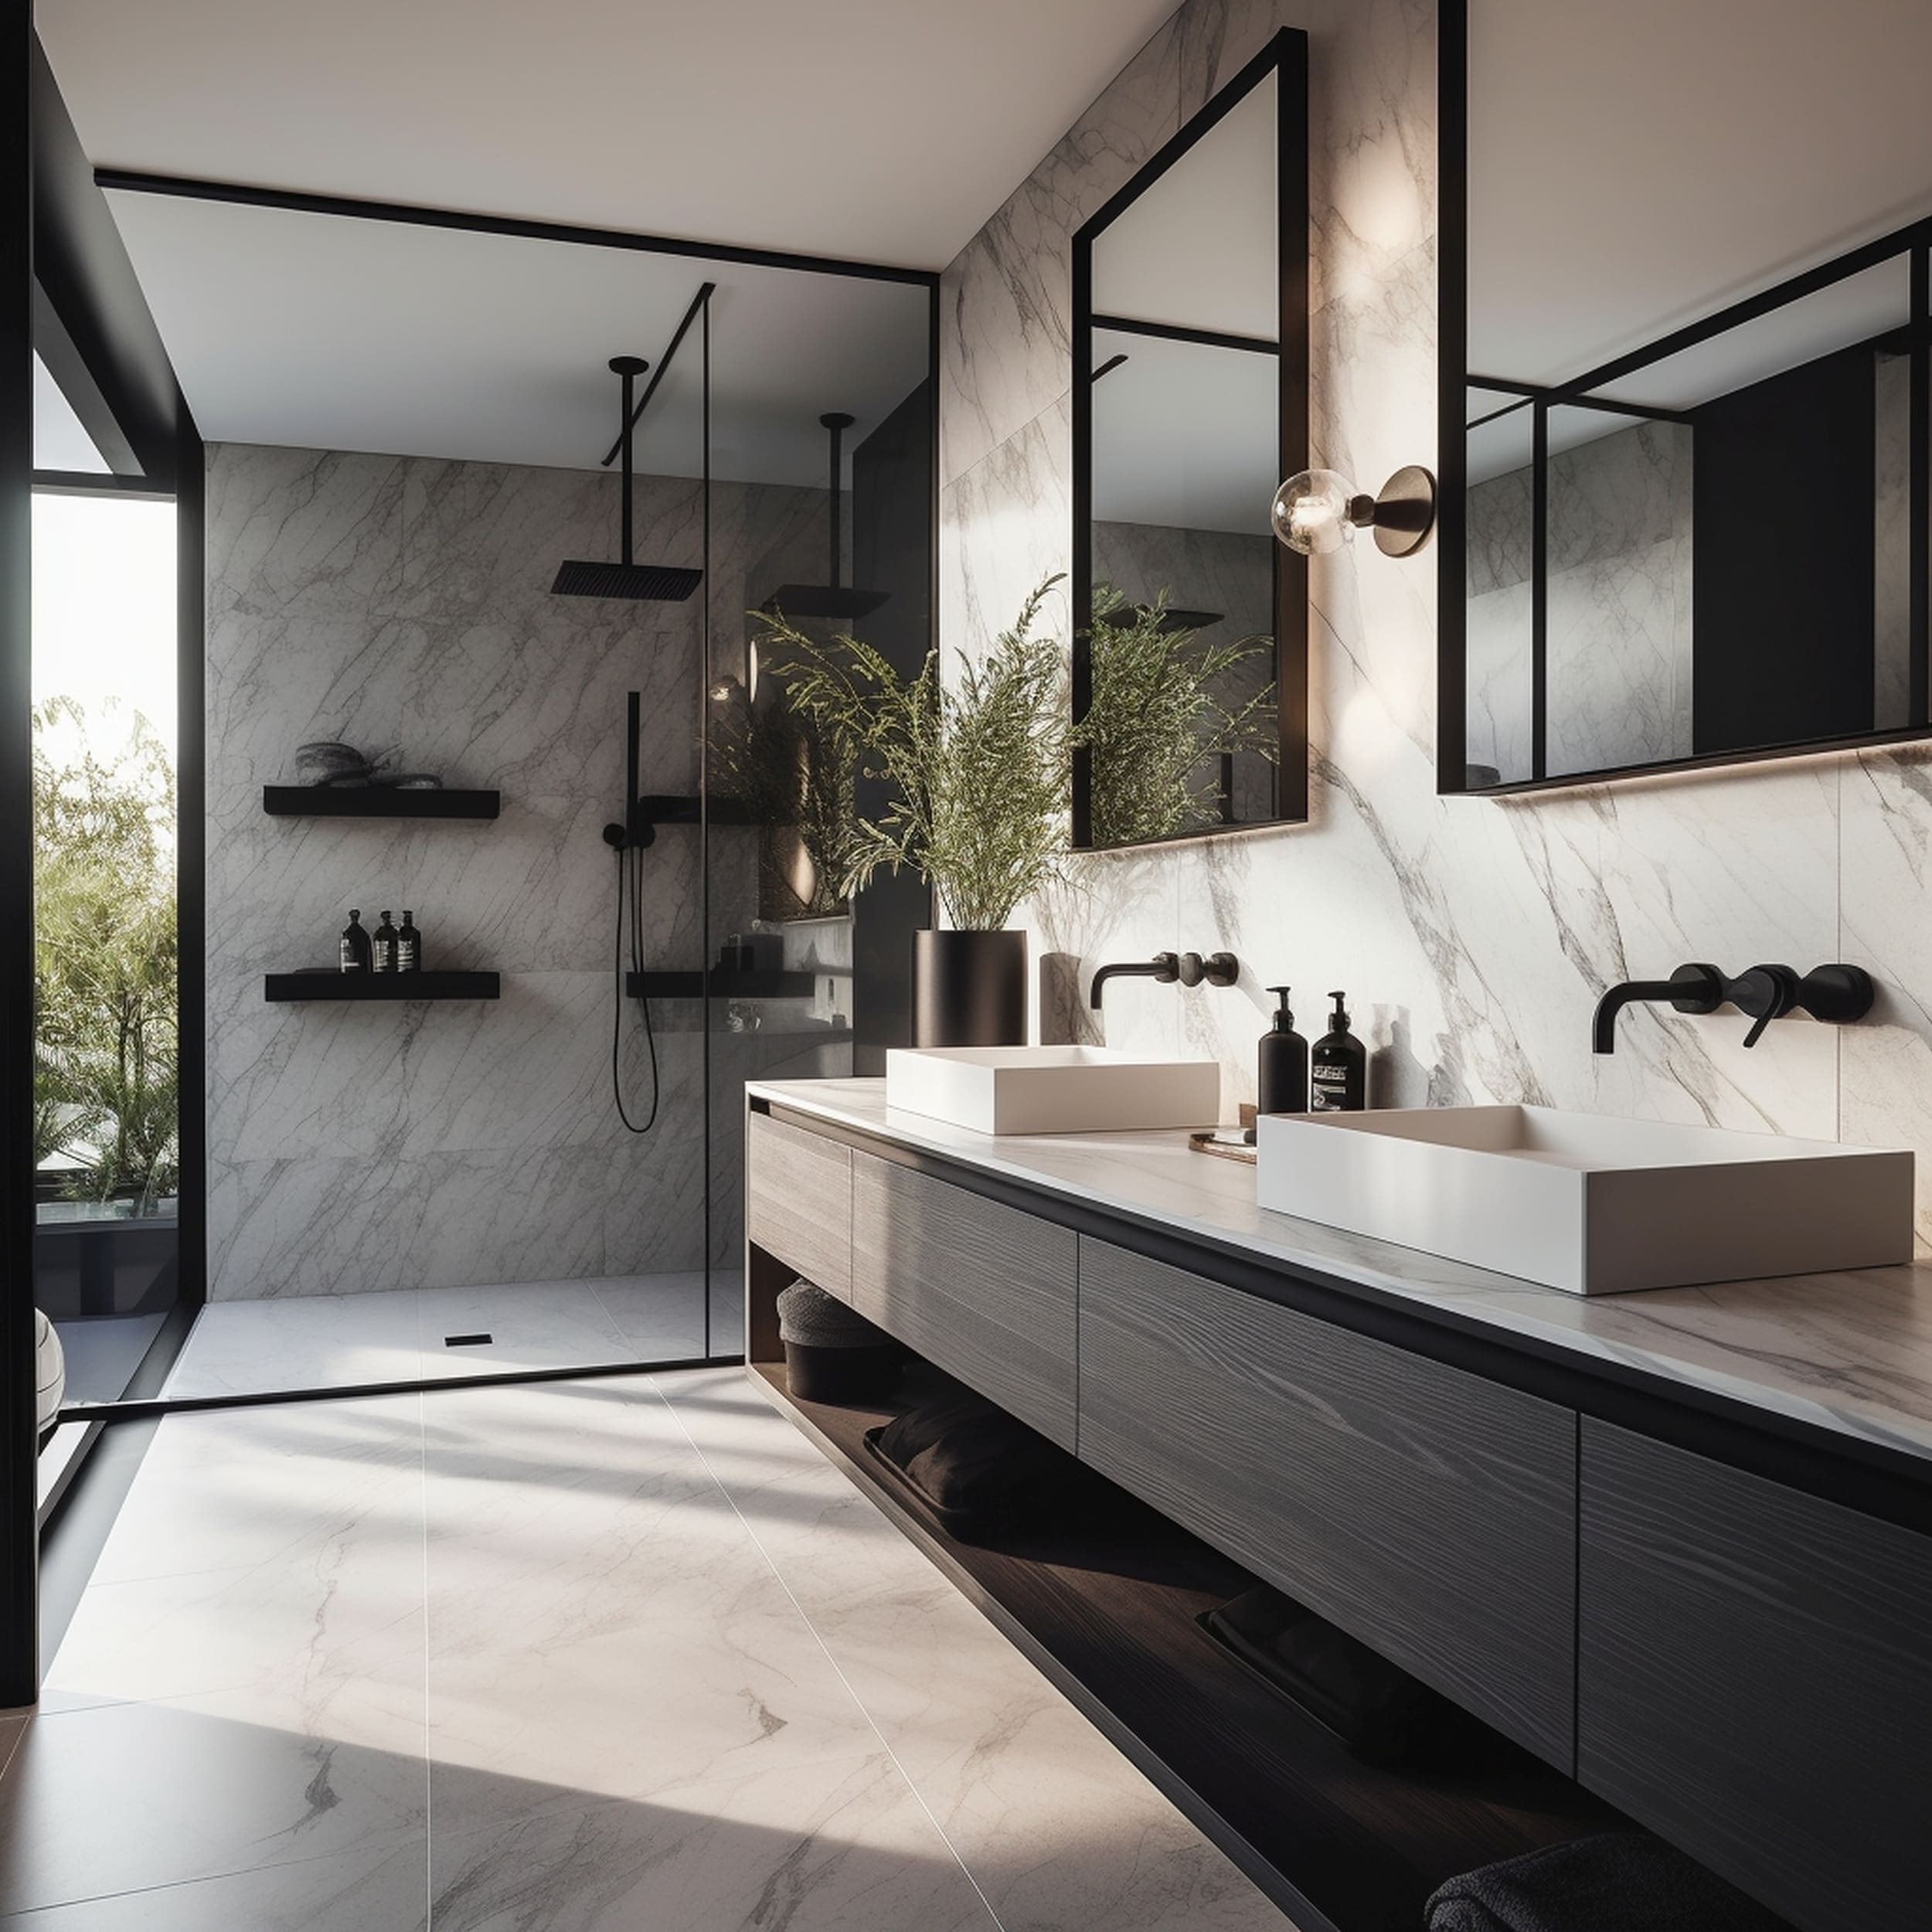 A Modern Bathroom With Matte Black Fixtures and Marble Designs on the Countertop Wall and Floor